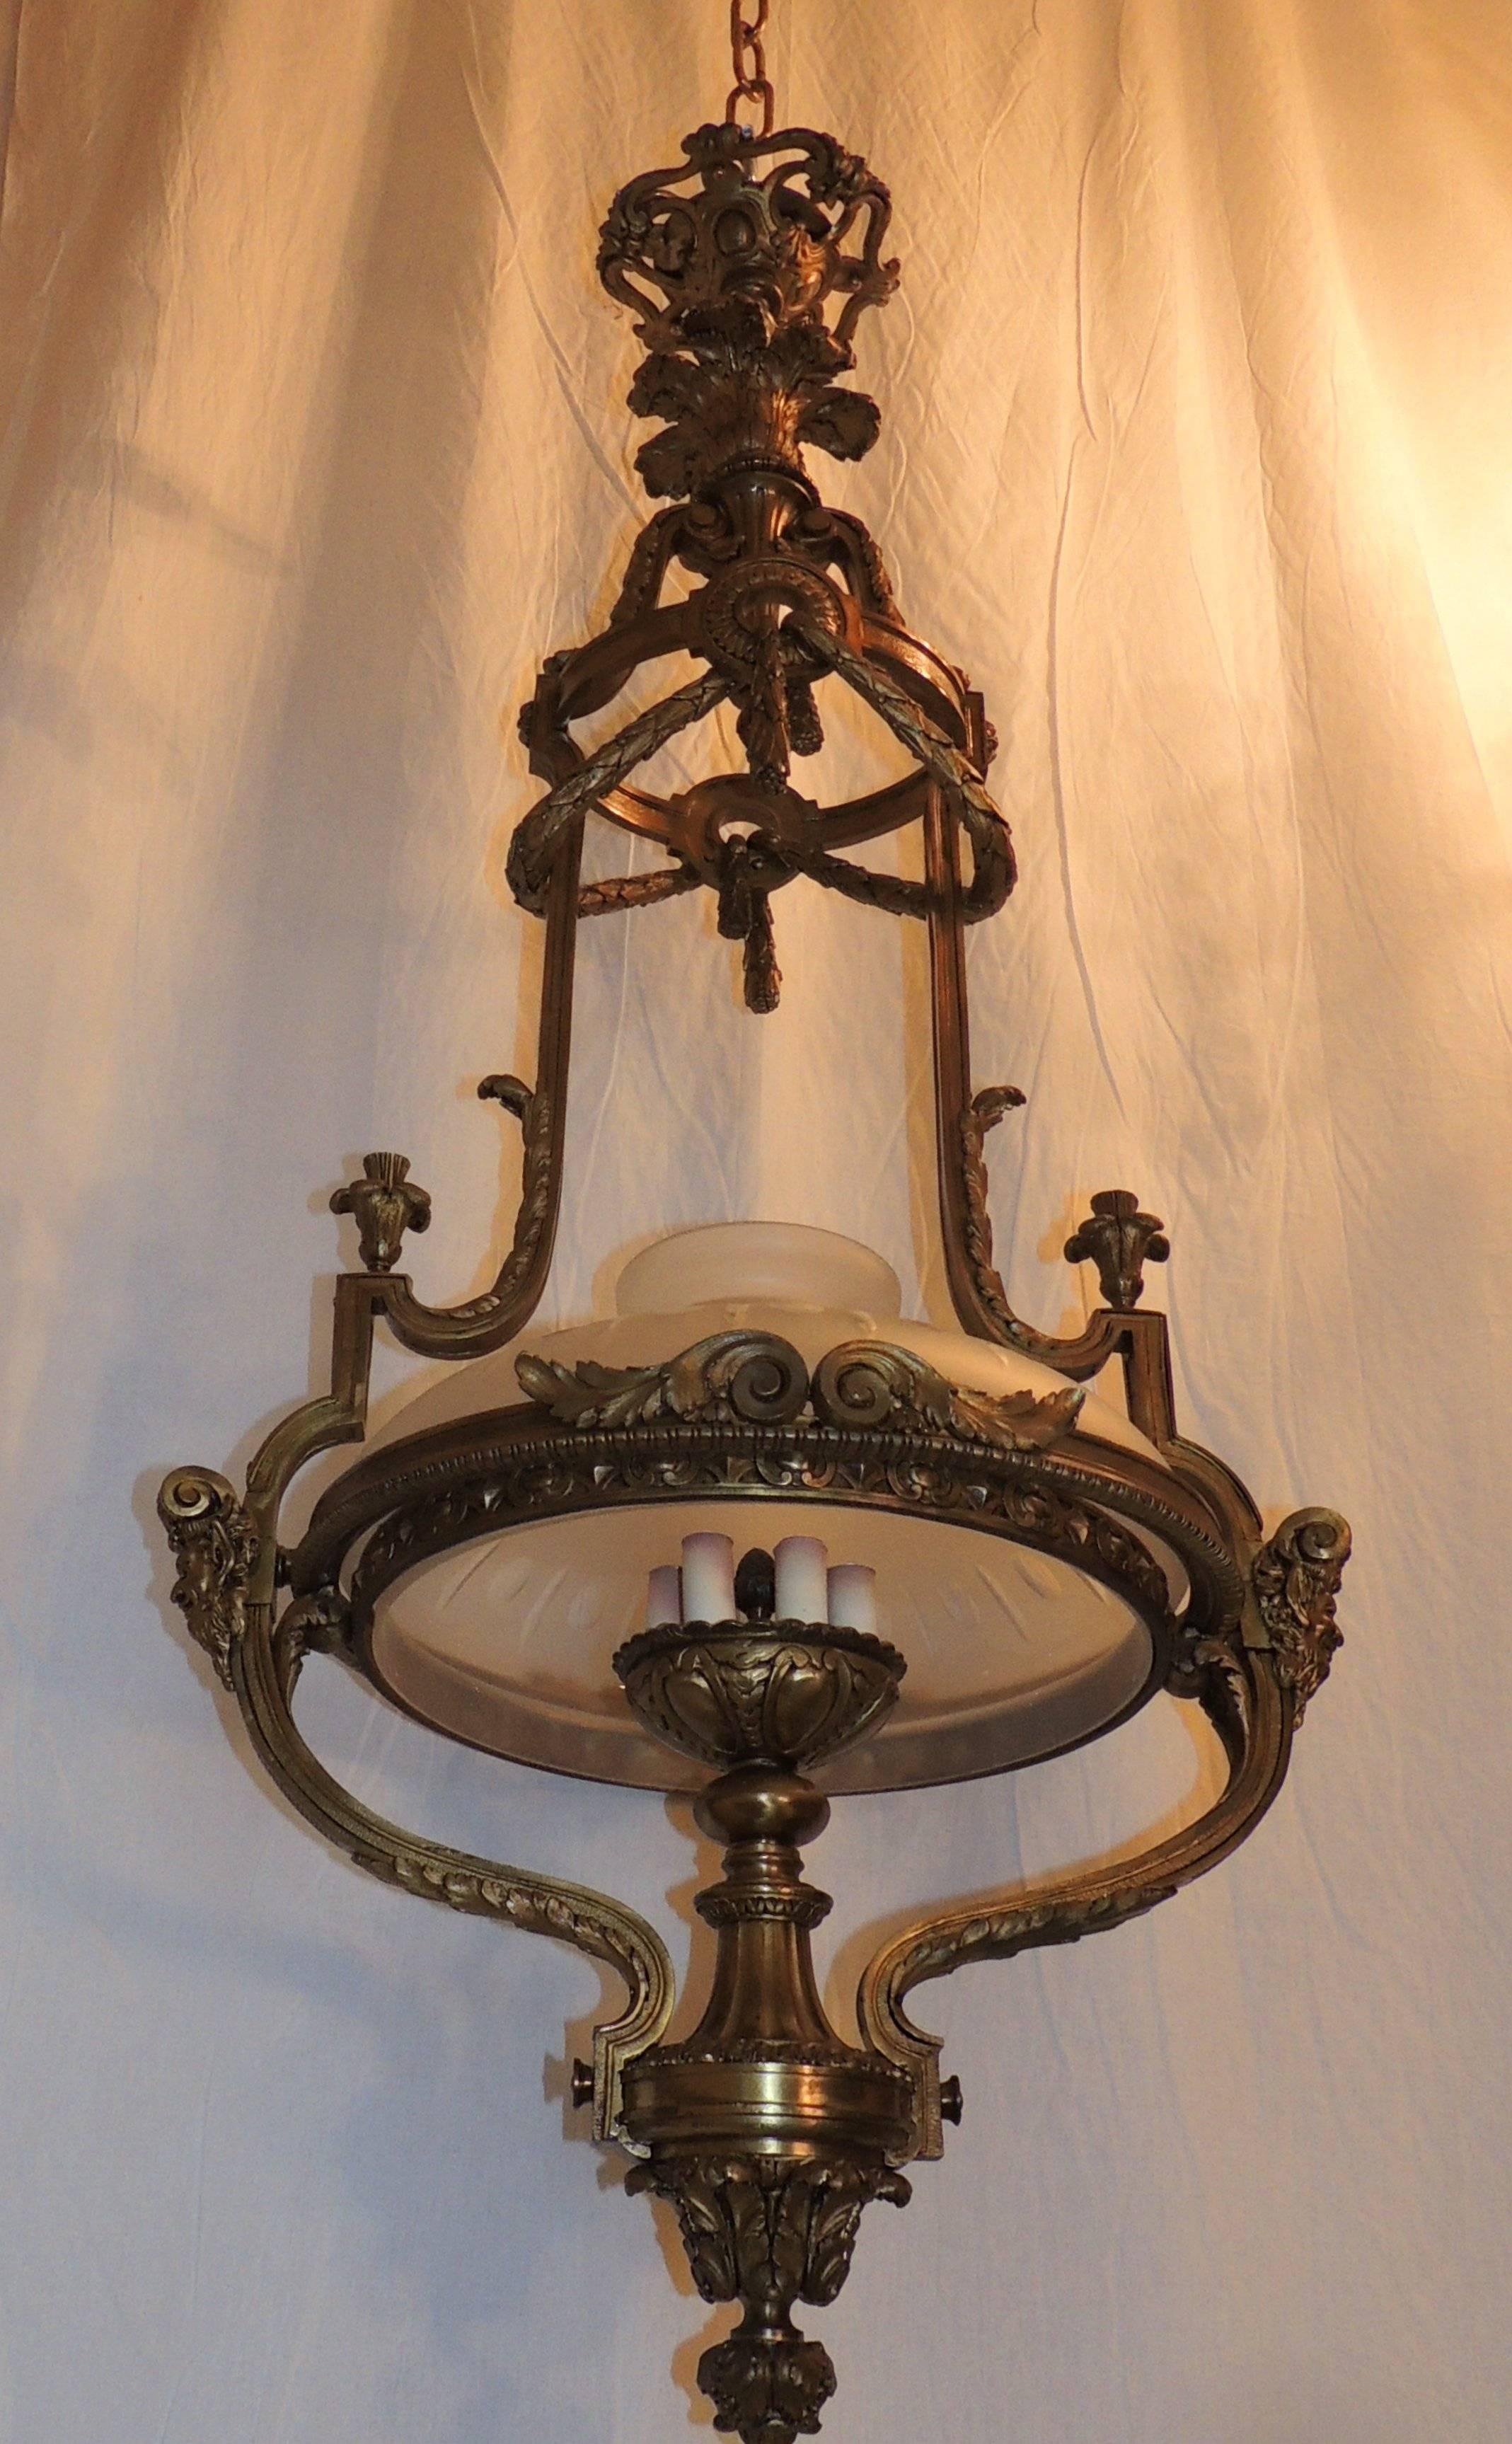 Monumental French Victorian gilt bronze frosted globe chandelier fixture lantern.

Measures: 50